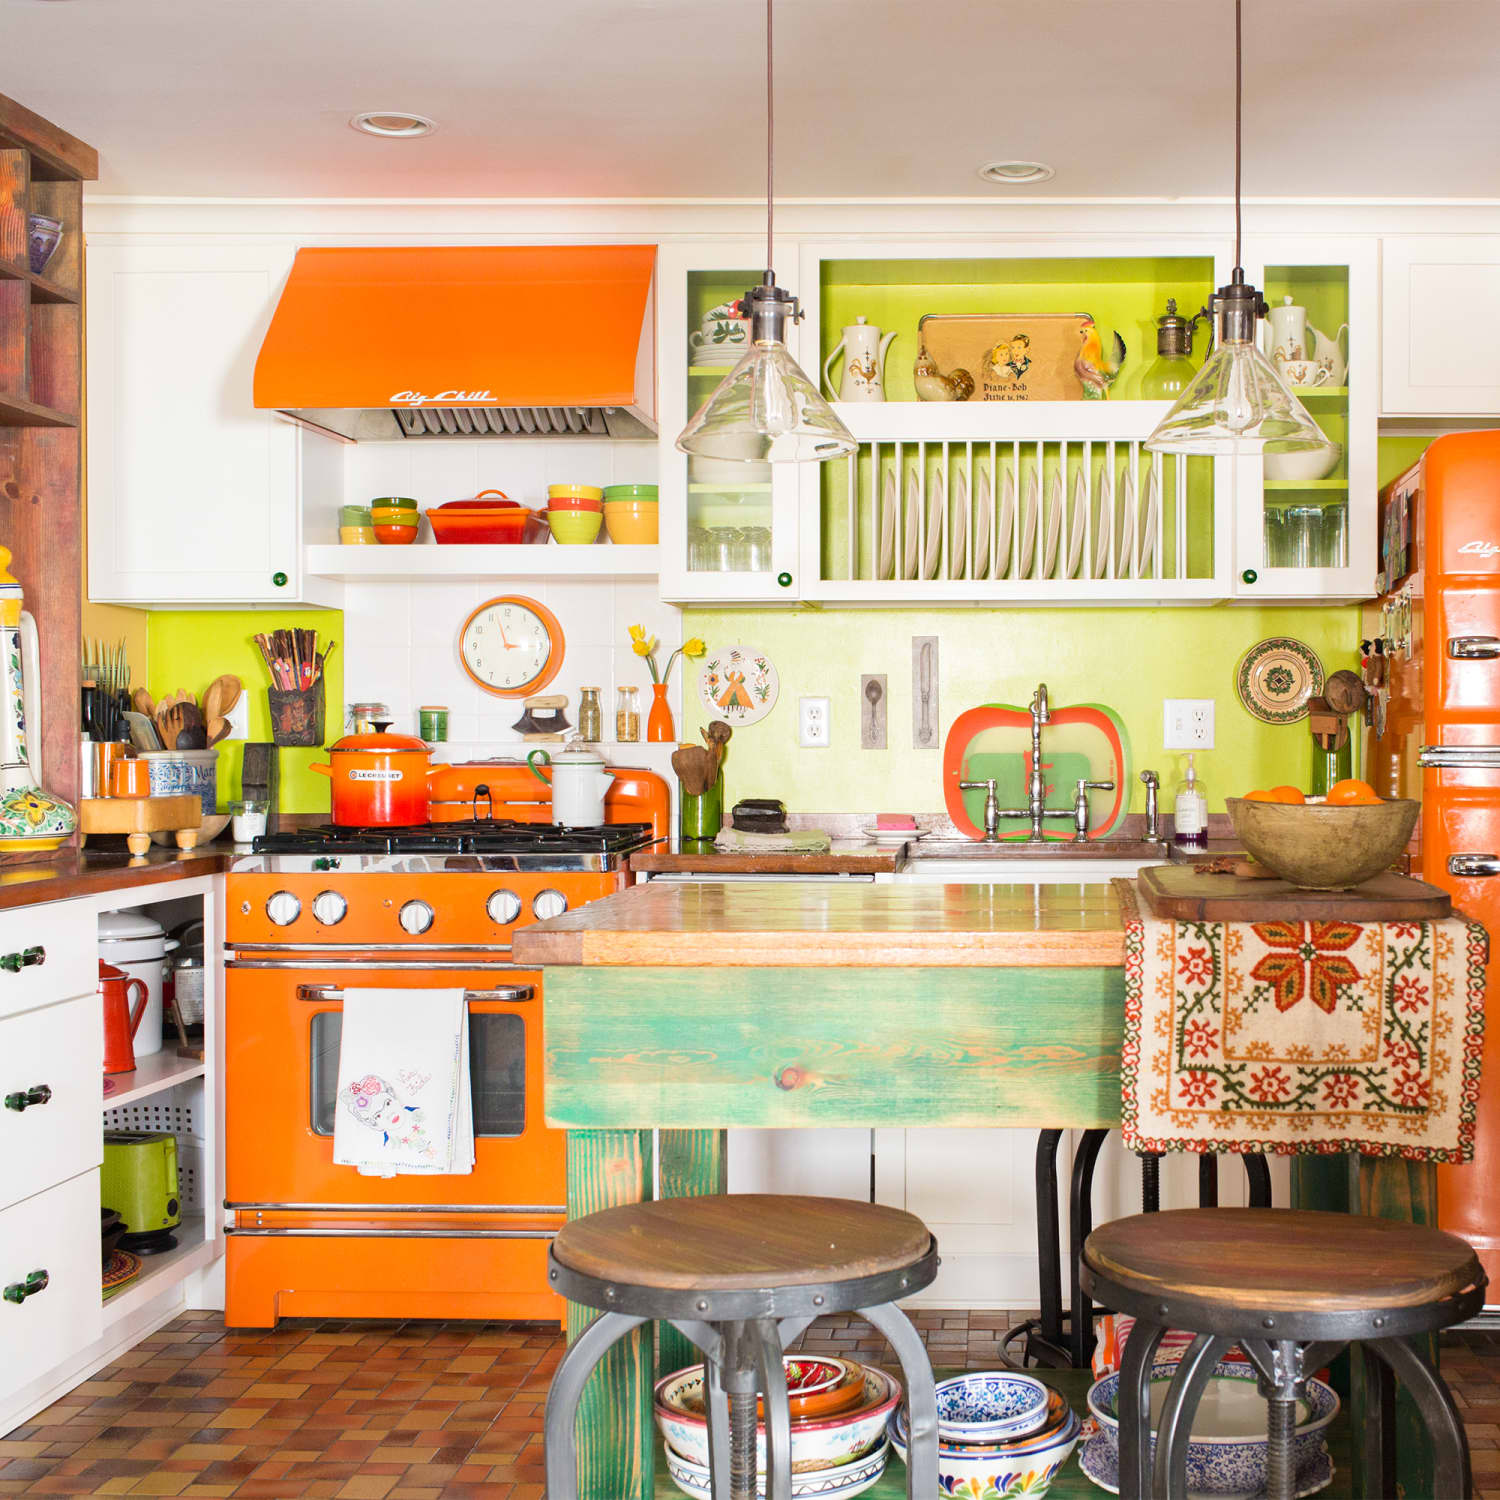 Colorful Appliances Take the Spotlight in Today's Kitchens